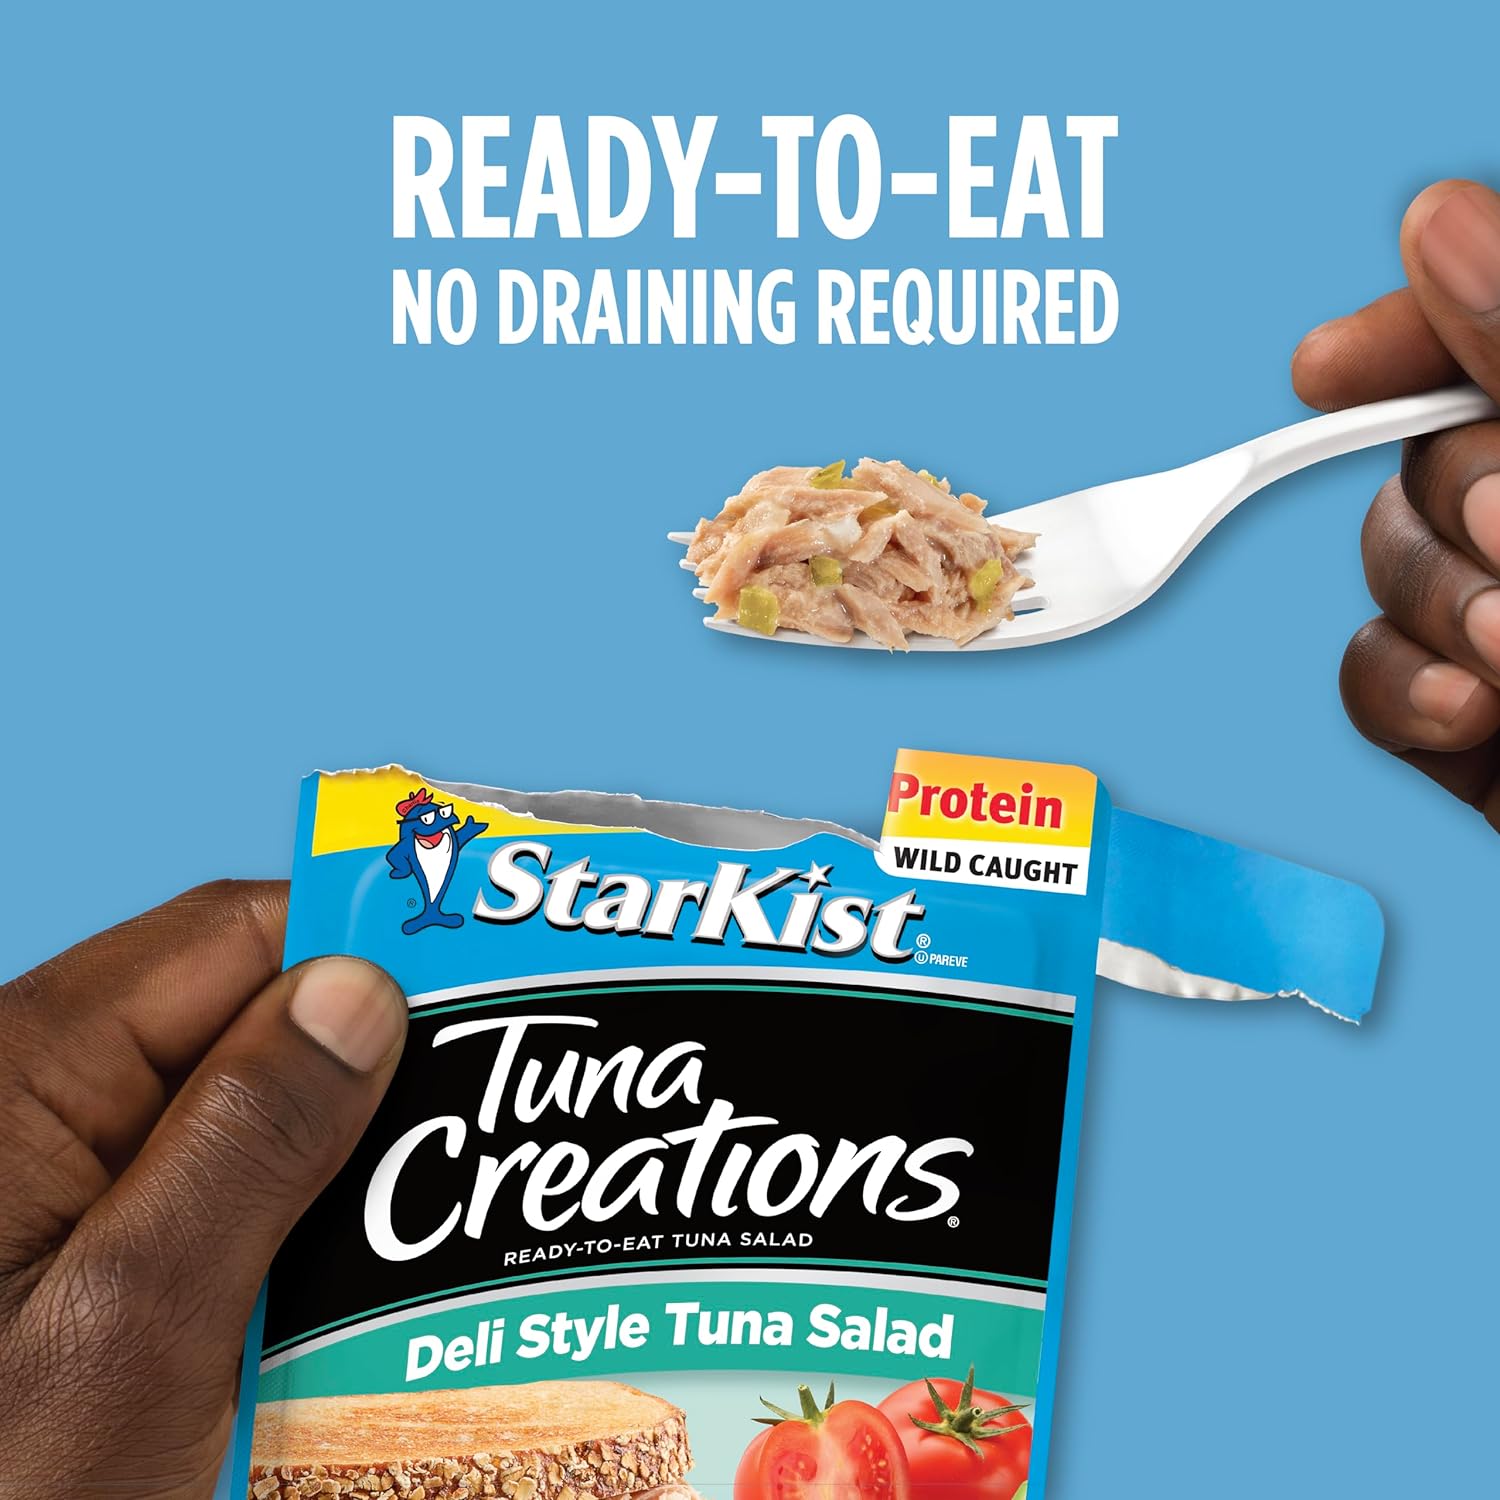 StarKist Ready-to-Eat Tuna Salad, Original Deli Style, 3 oz pouch (Pack of 24) (Packaging May Vary) : Grocery & Gourmet Food